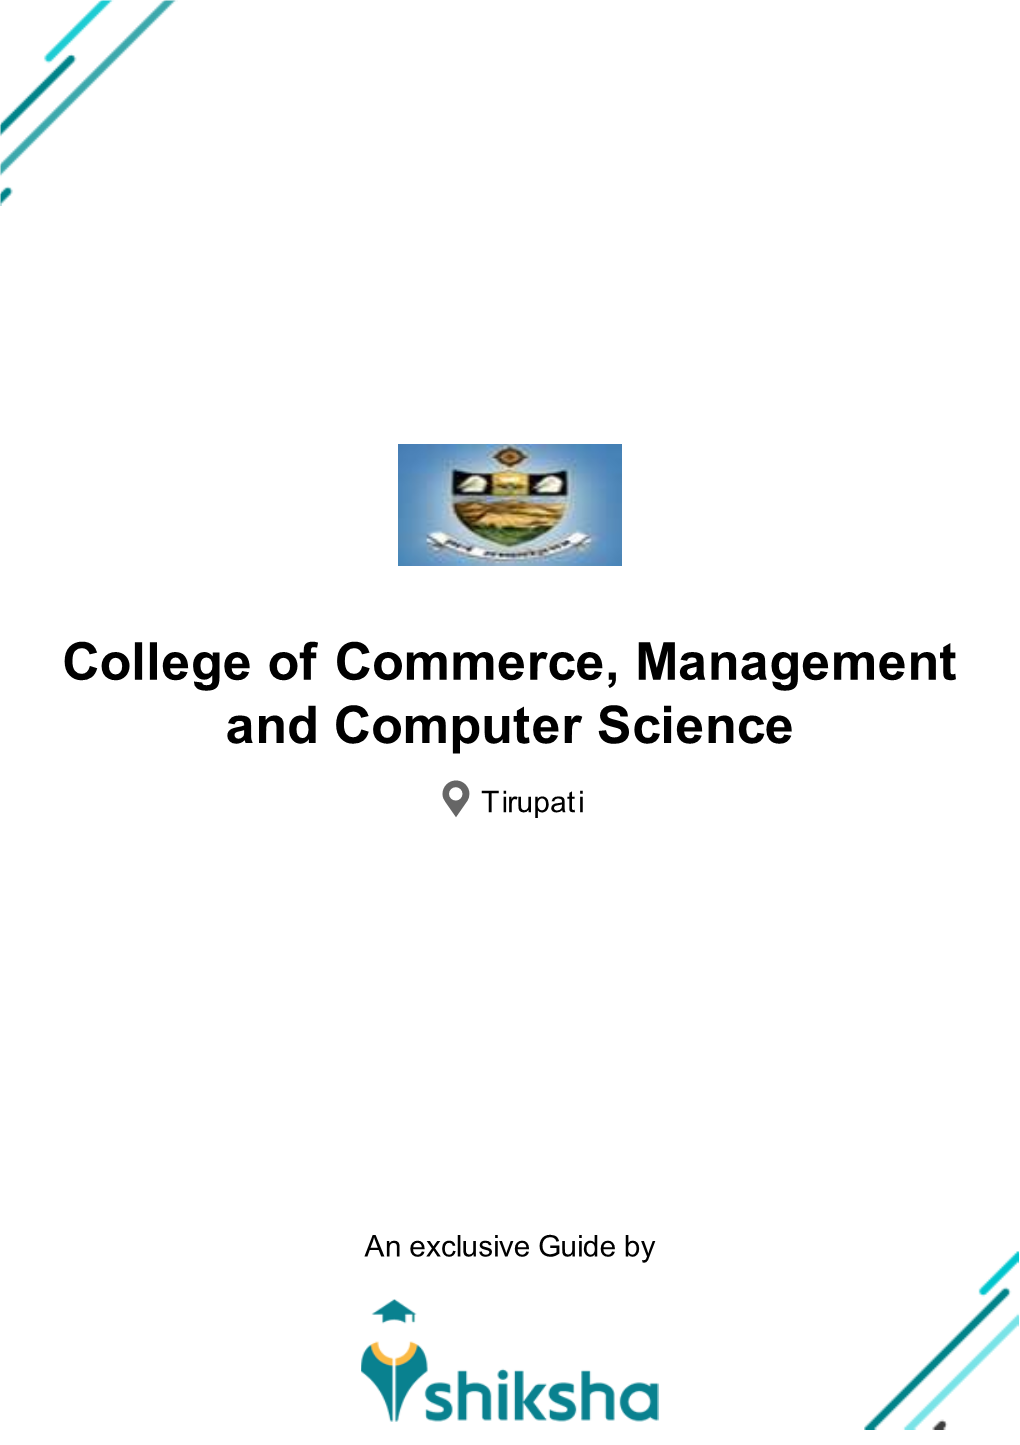 College of Commerce, Management and Computer Science